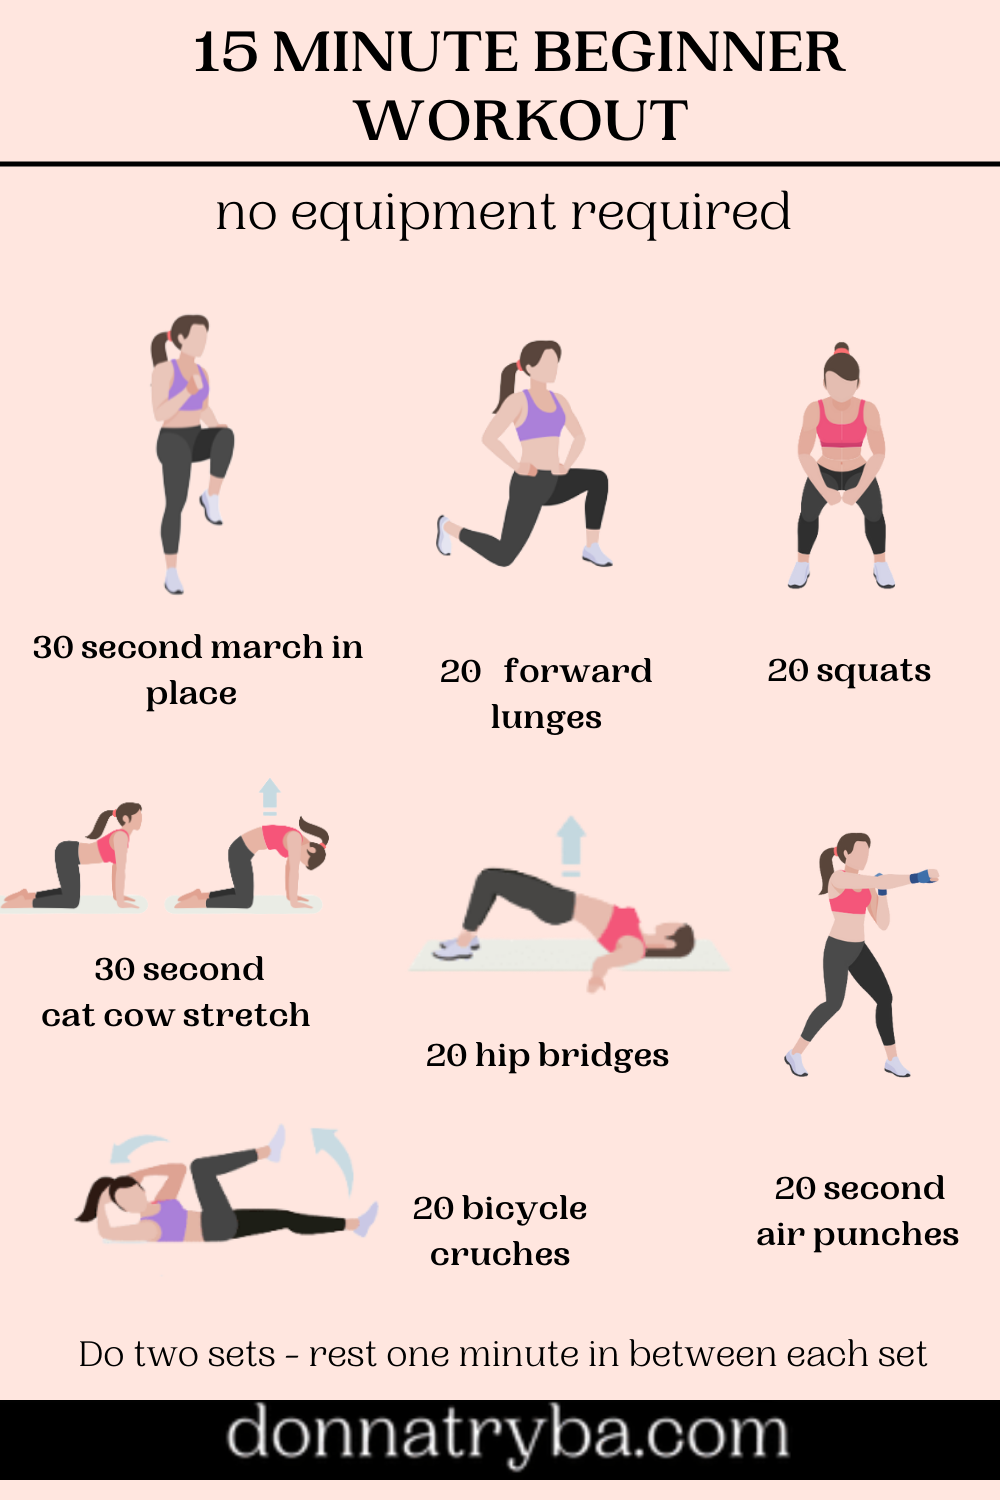 5-simple-workout-routines-you-can-do-anywhere-donna-tryba